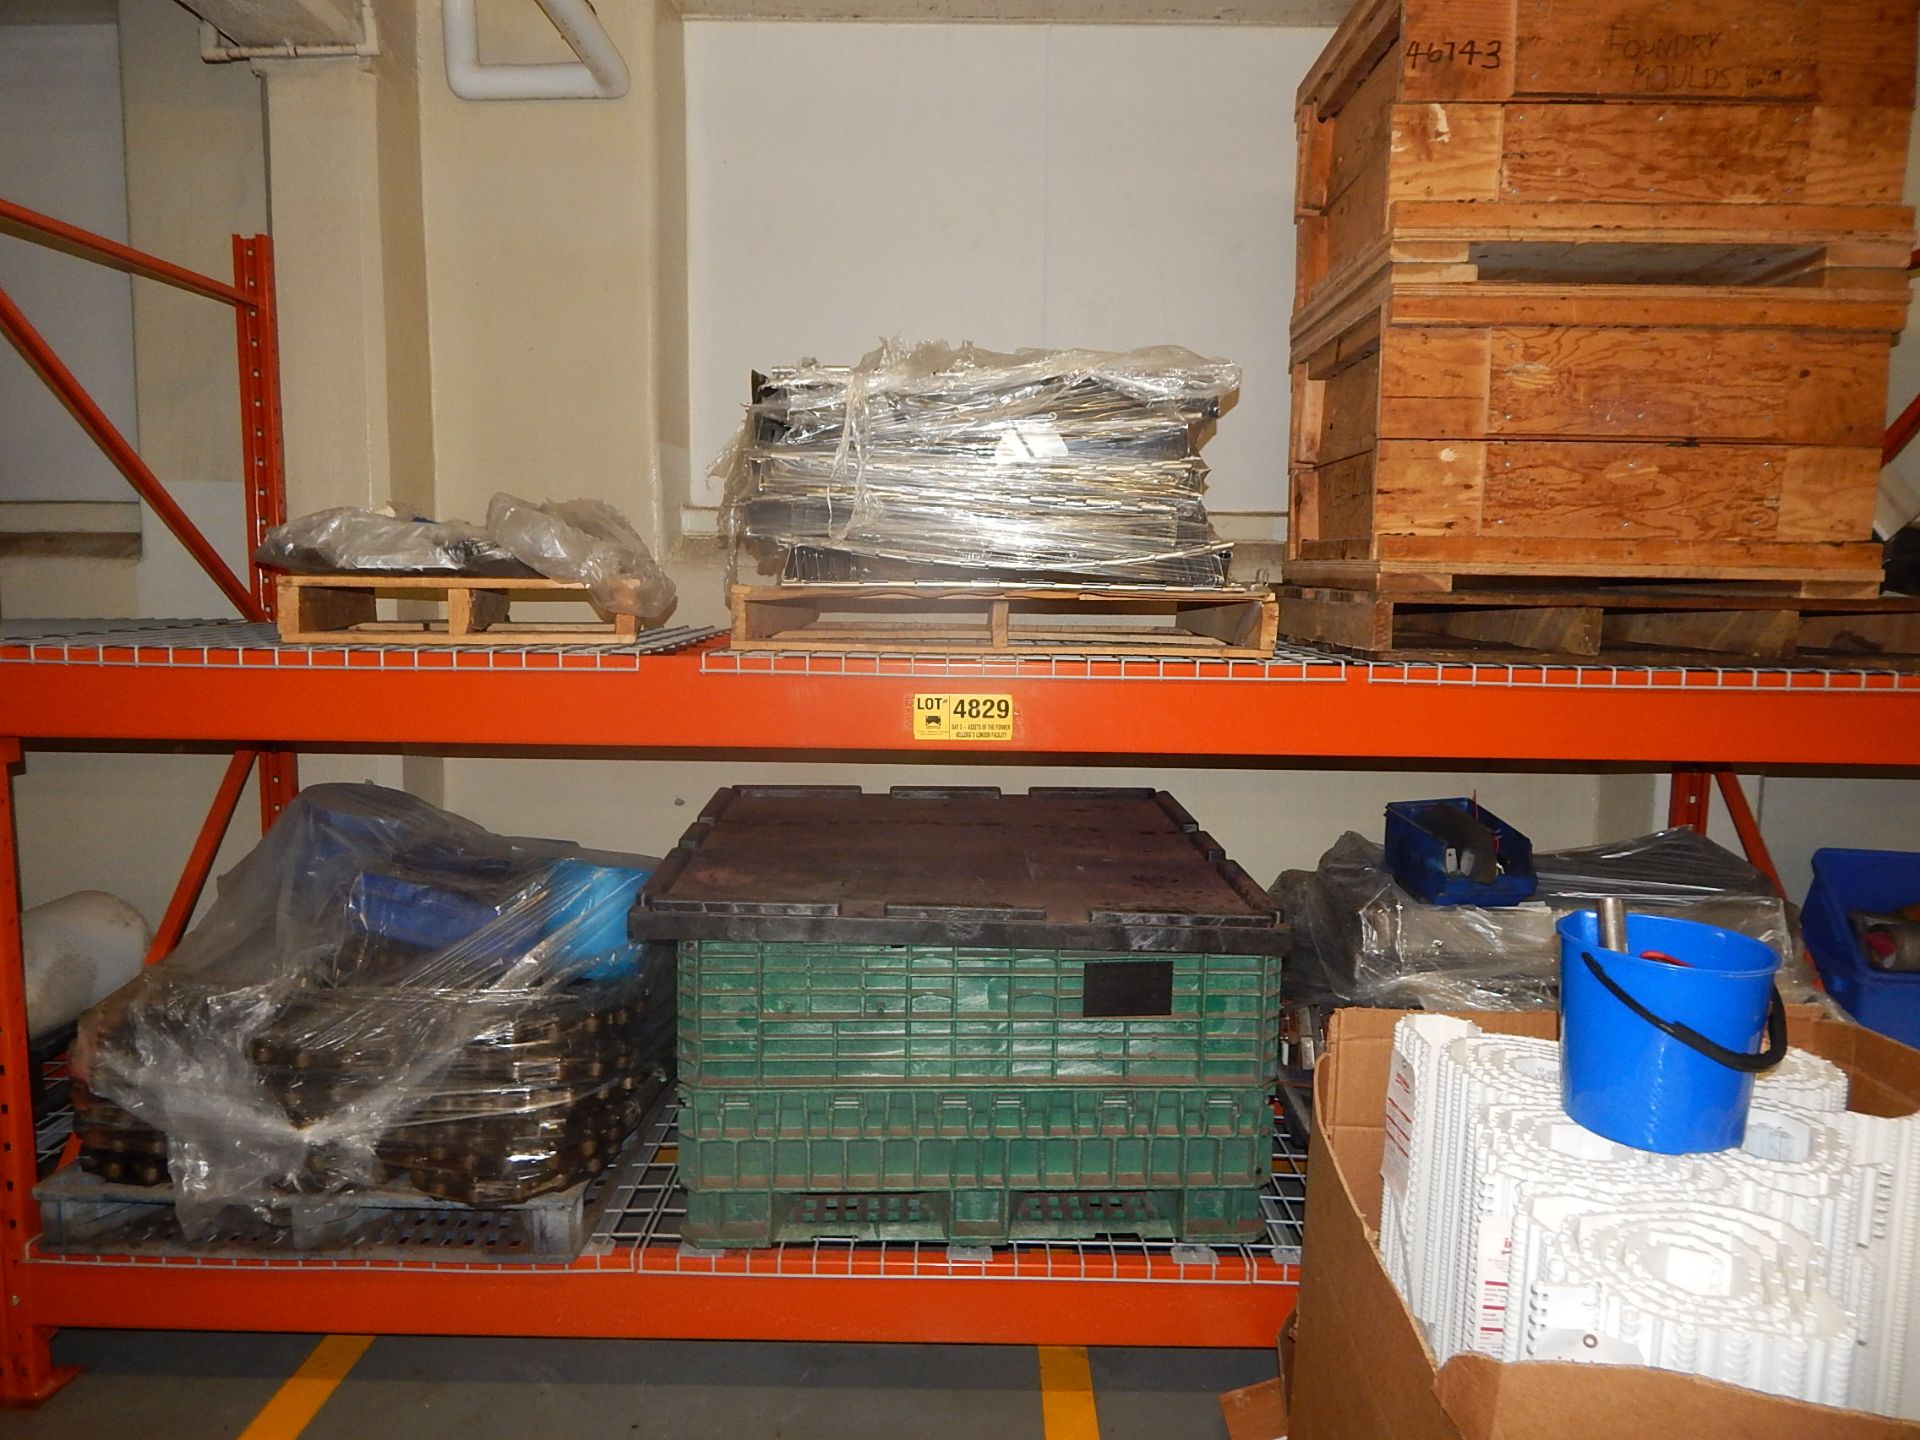 LOT/ CONTENTS OF SHELF CONSISTING OF MOULDS, PLASTIC BELT , CHAIN AND STAINLESS STEEL BELT (BUILDING